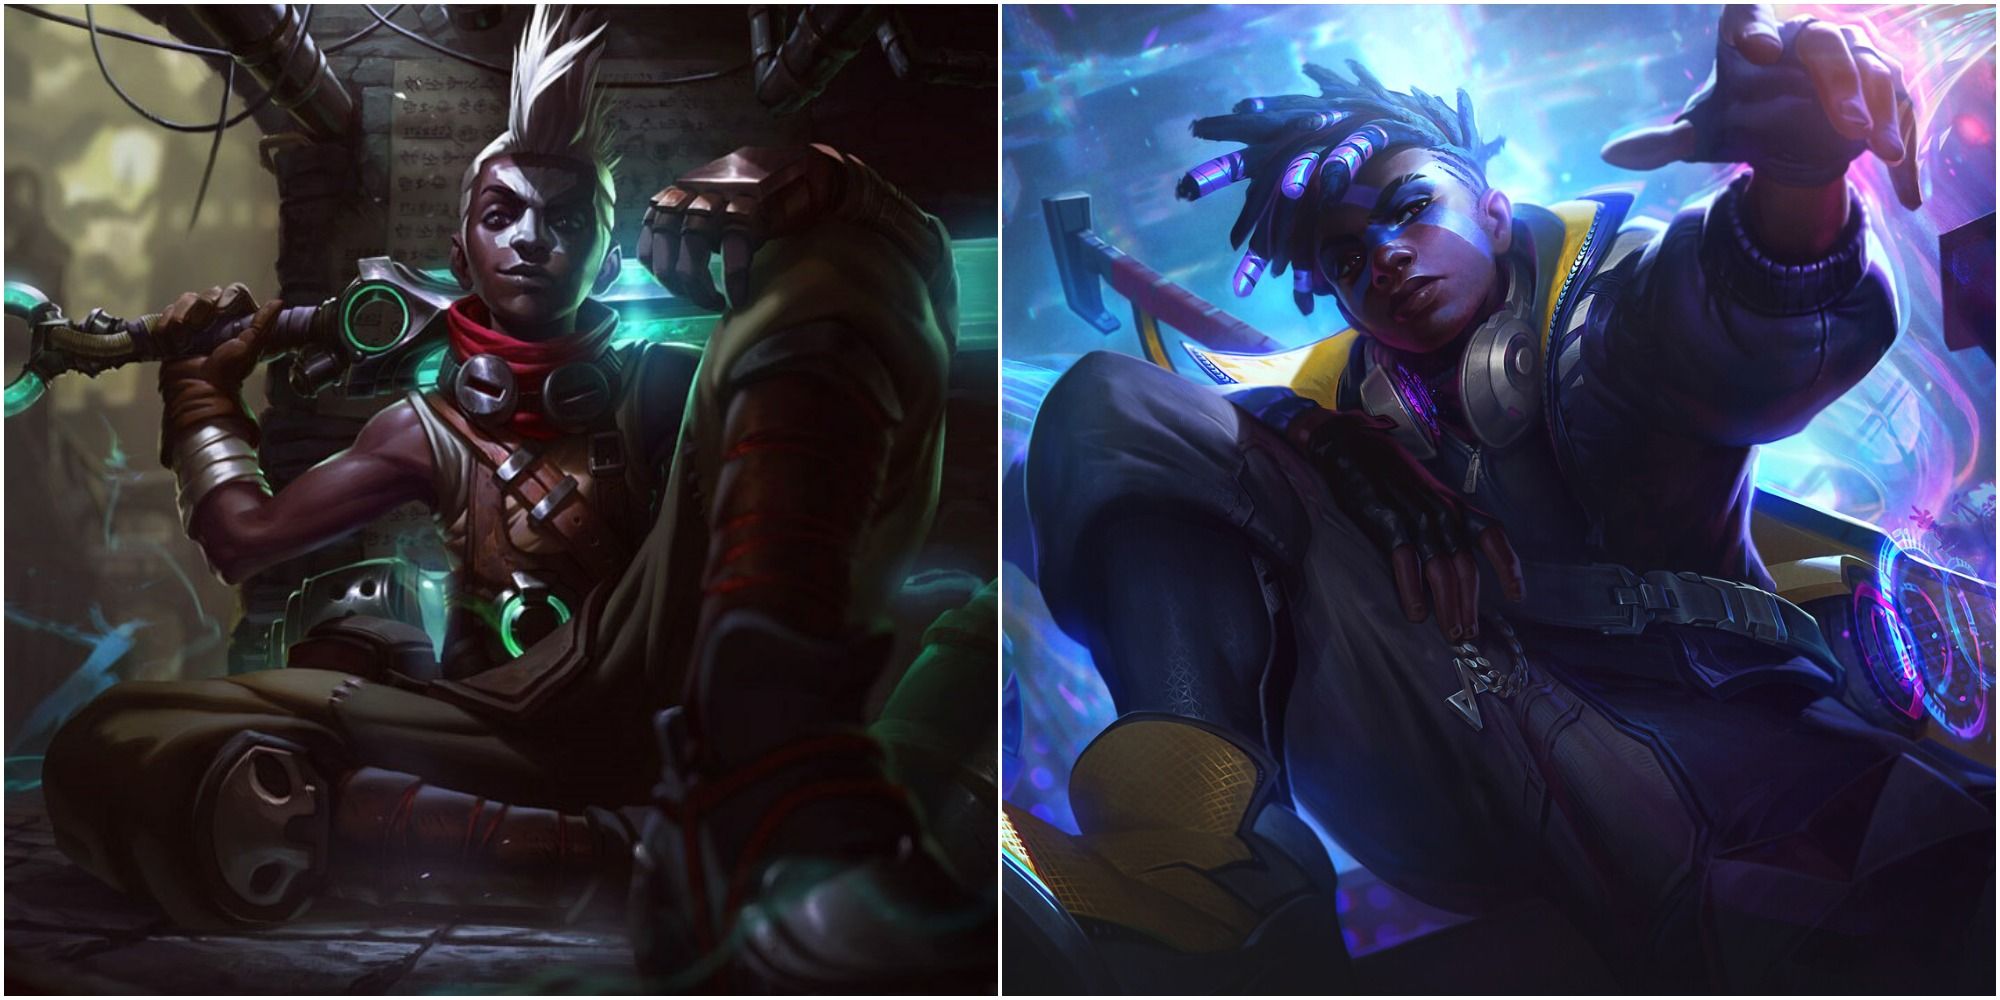 Ekko The Boy Who Shattered Time sitting in the sump in his base splash art and posing as True damage Ekko holding a bat